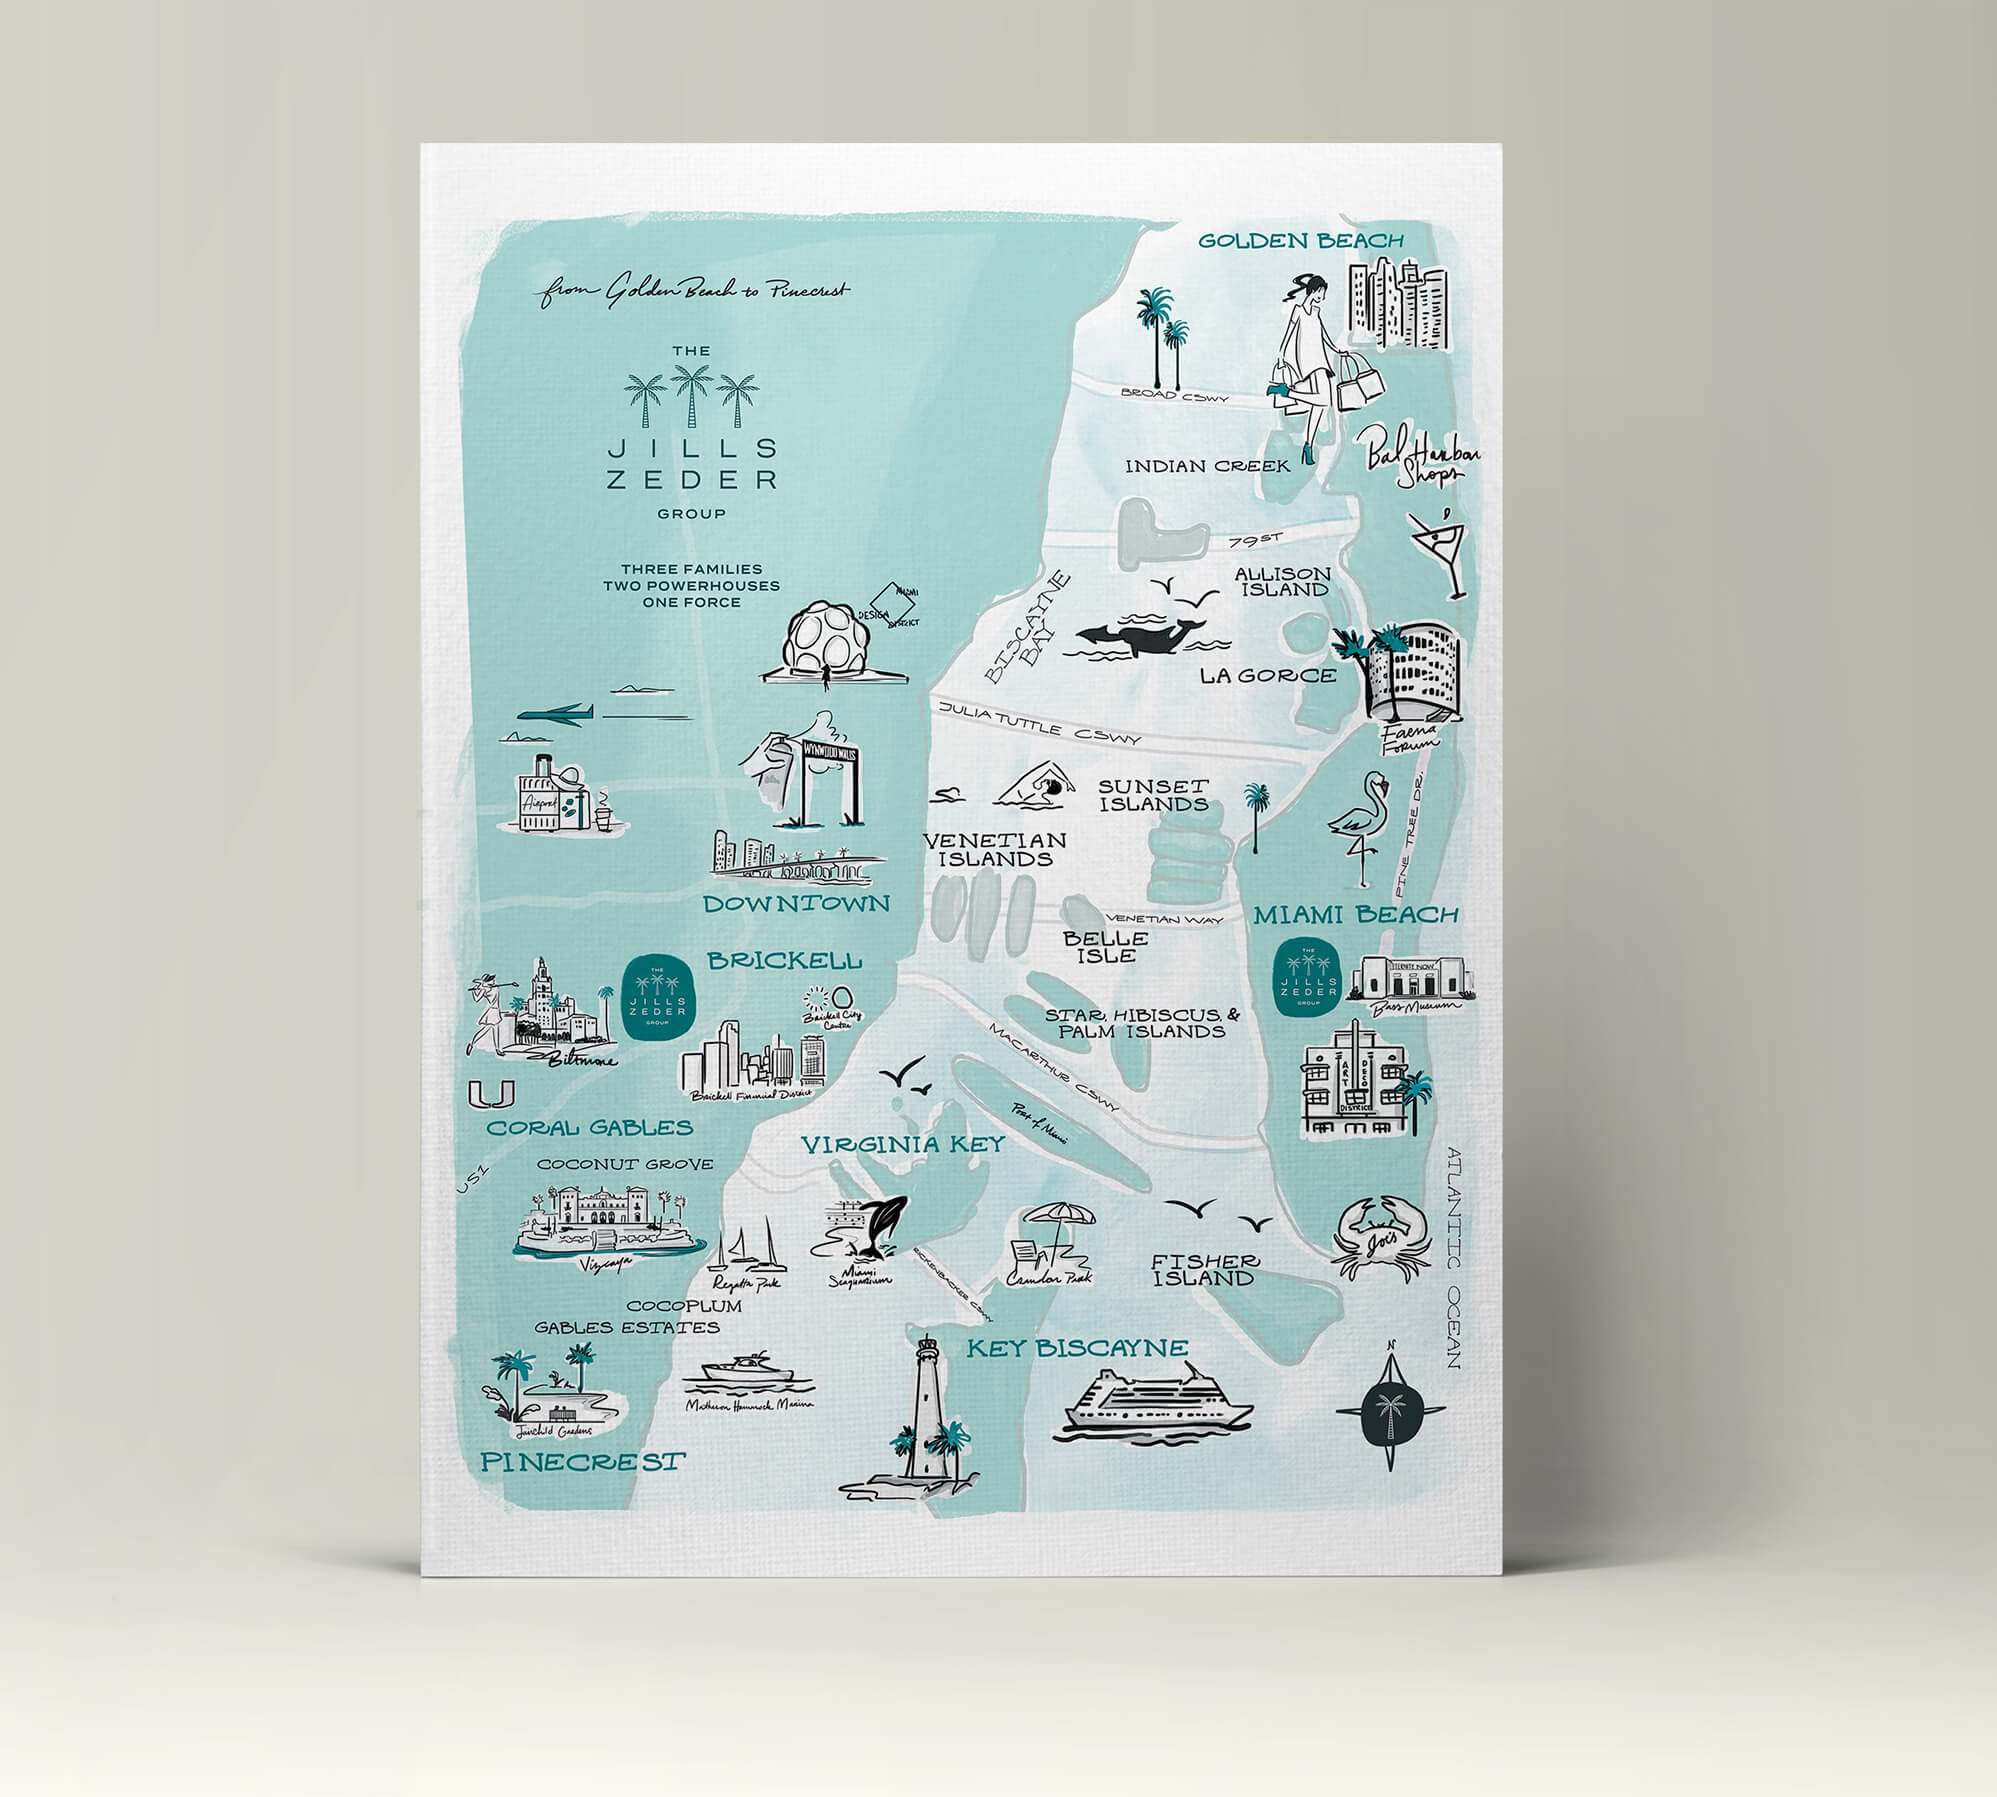 Jacober Creative Brand Identity for The Jills Zeder Group. Illustrated Map